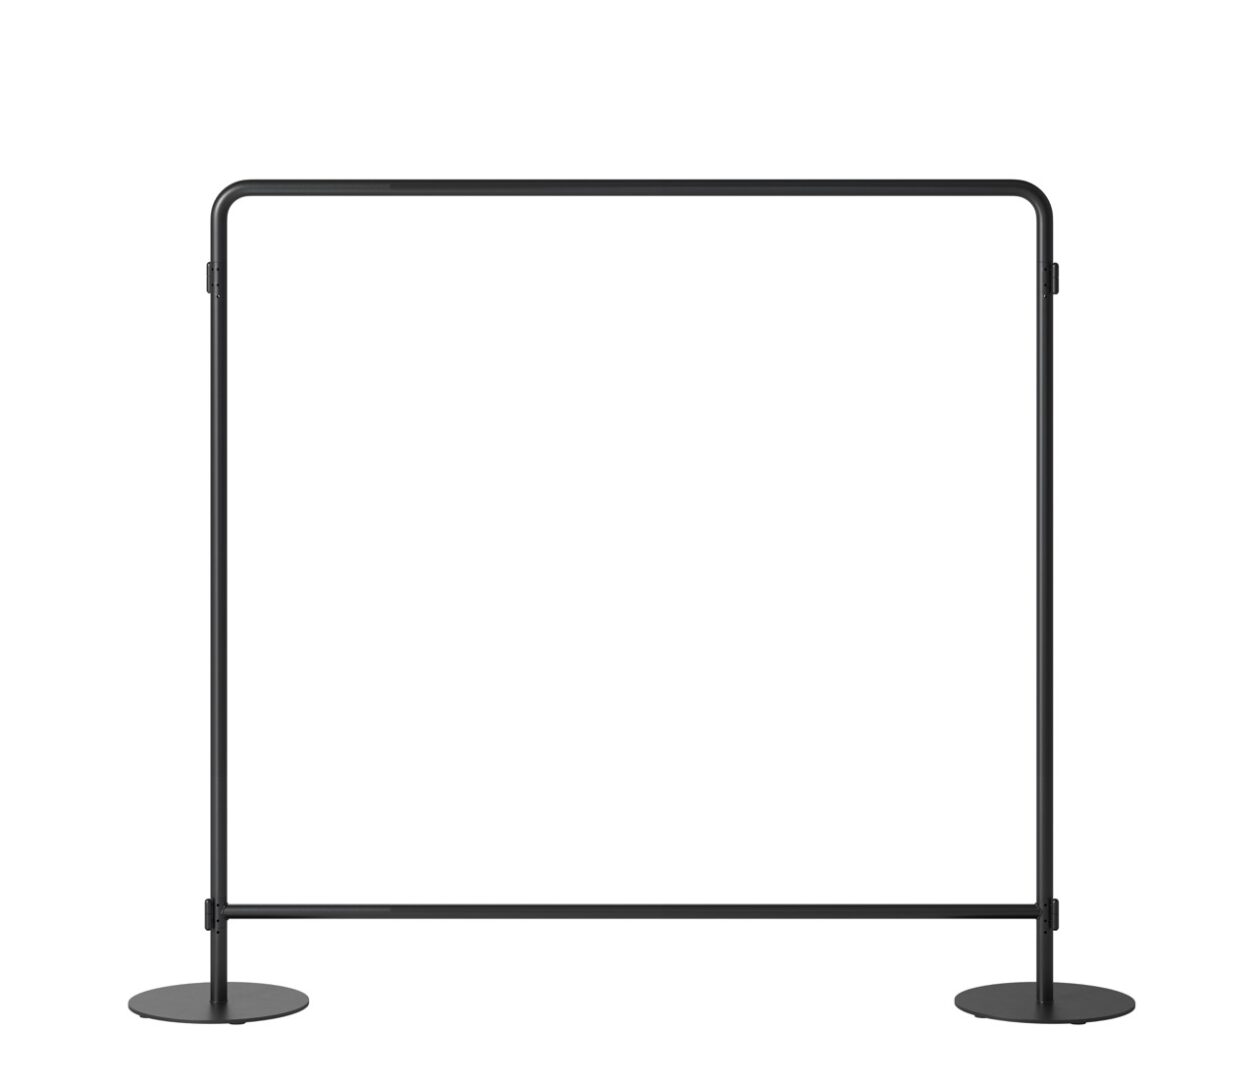 OCEE&FOUR – FourPeople Panels - Stand Alone – 1400x1370 - Frame - Packshot Image 2 Large